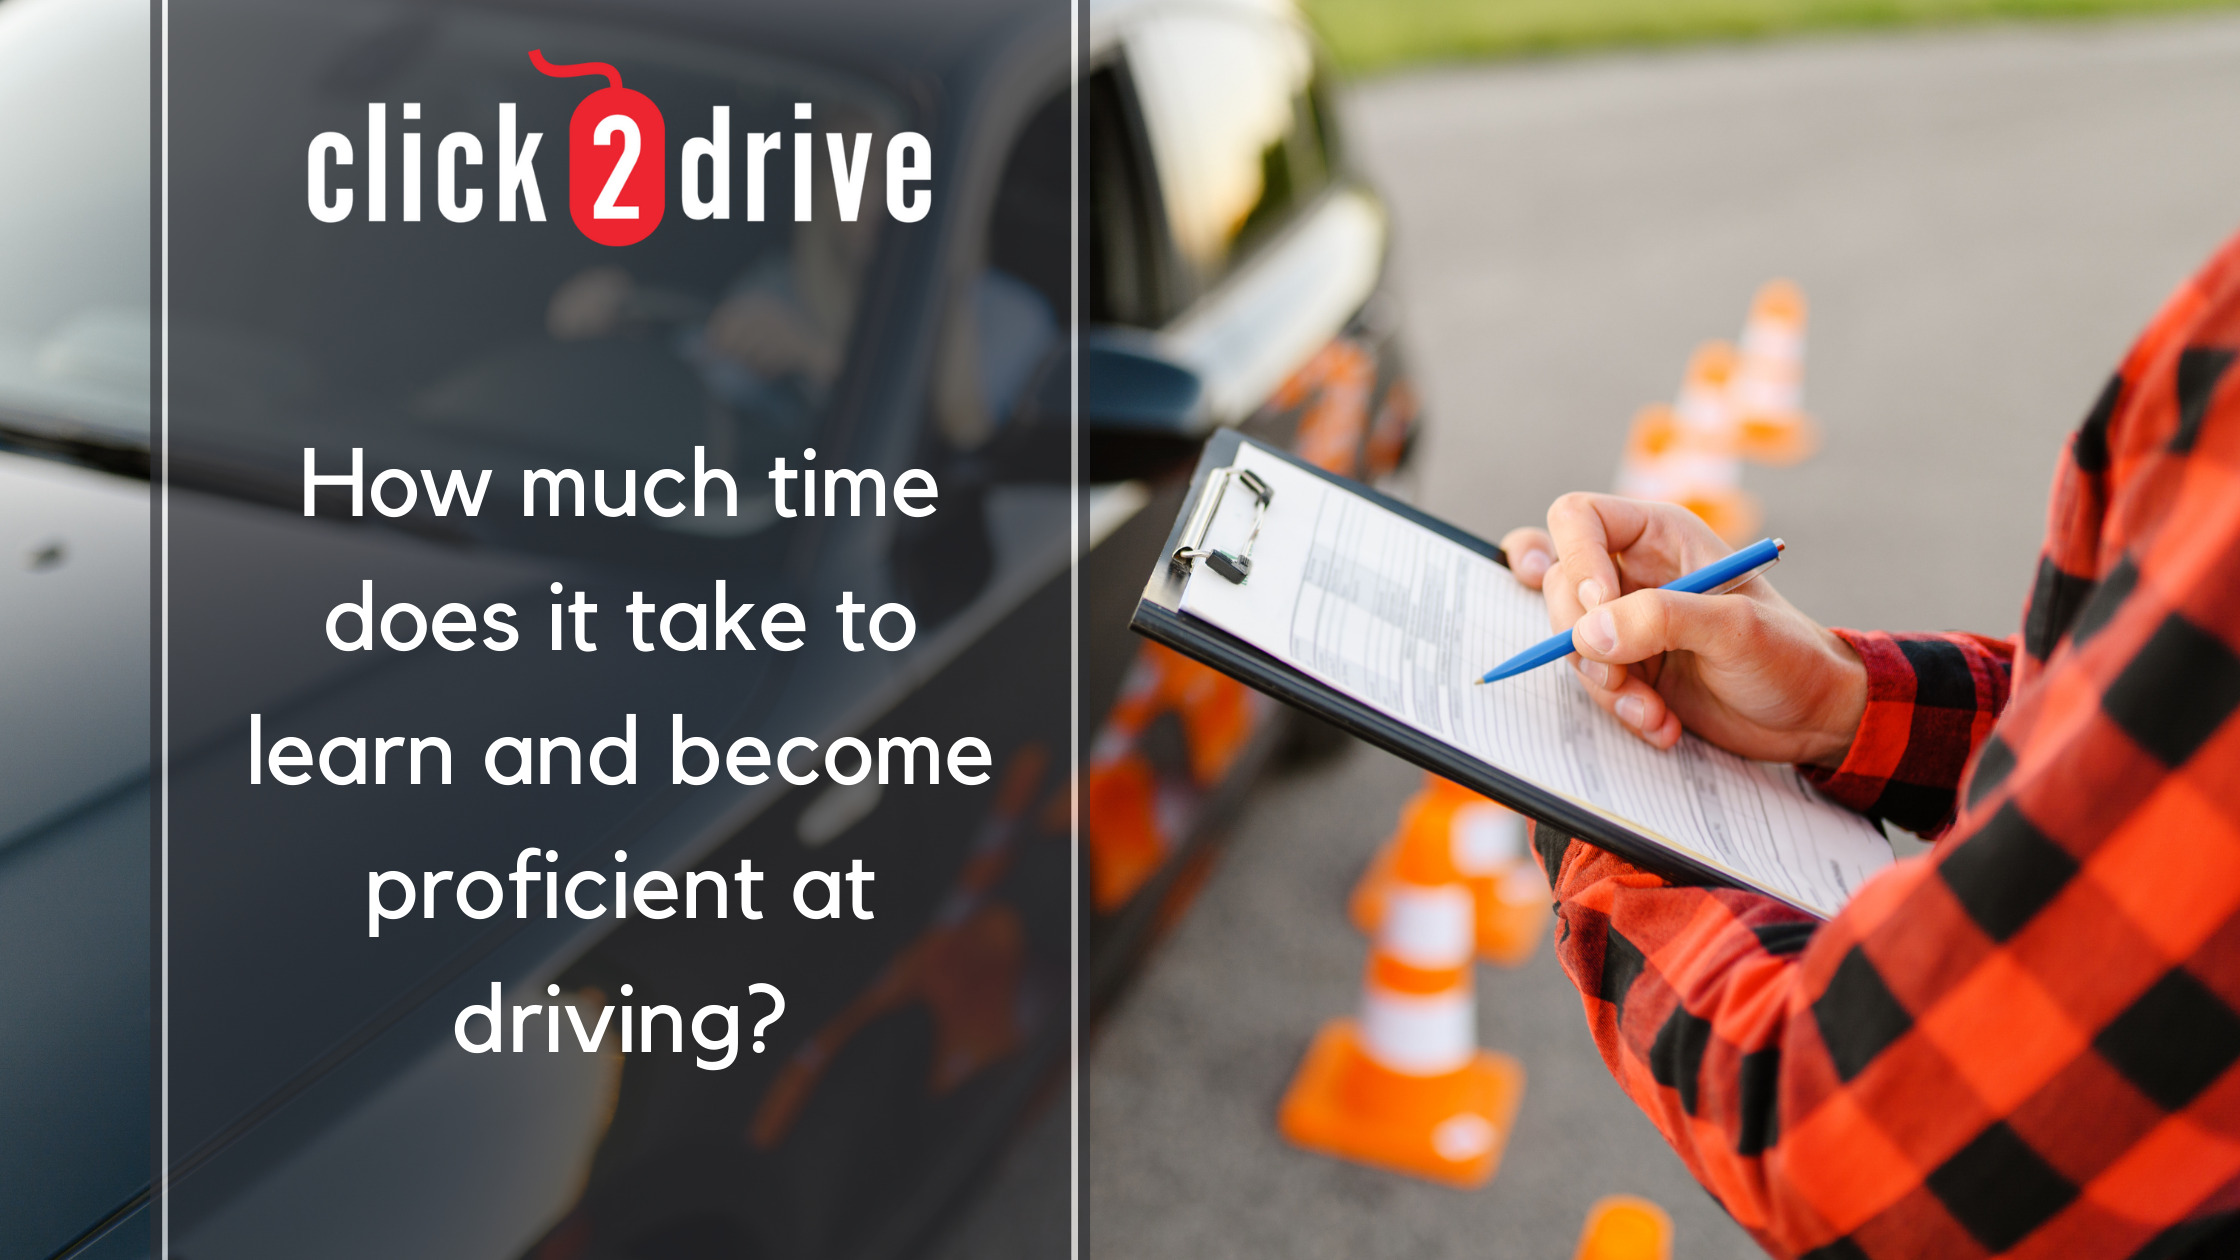 How much time does it take to learn and become proficient at driving